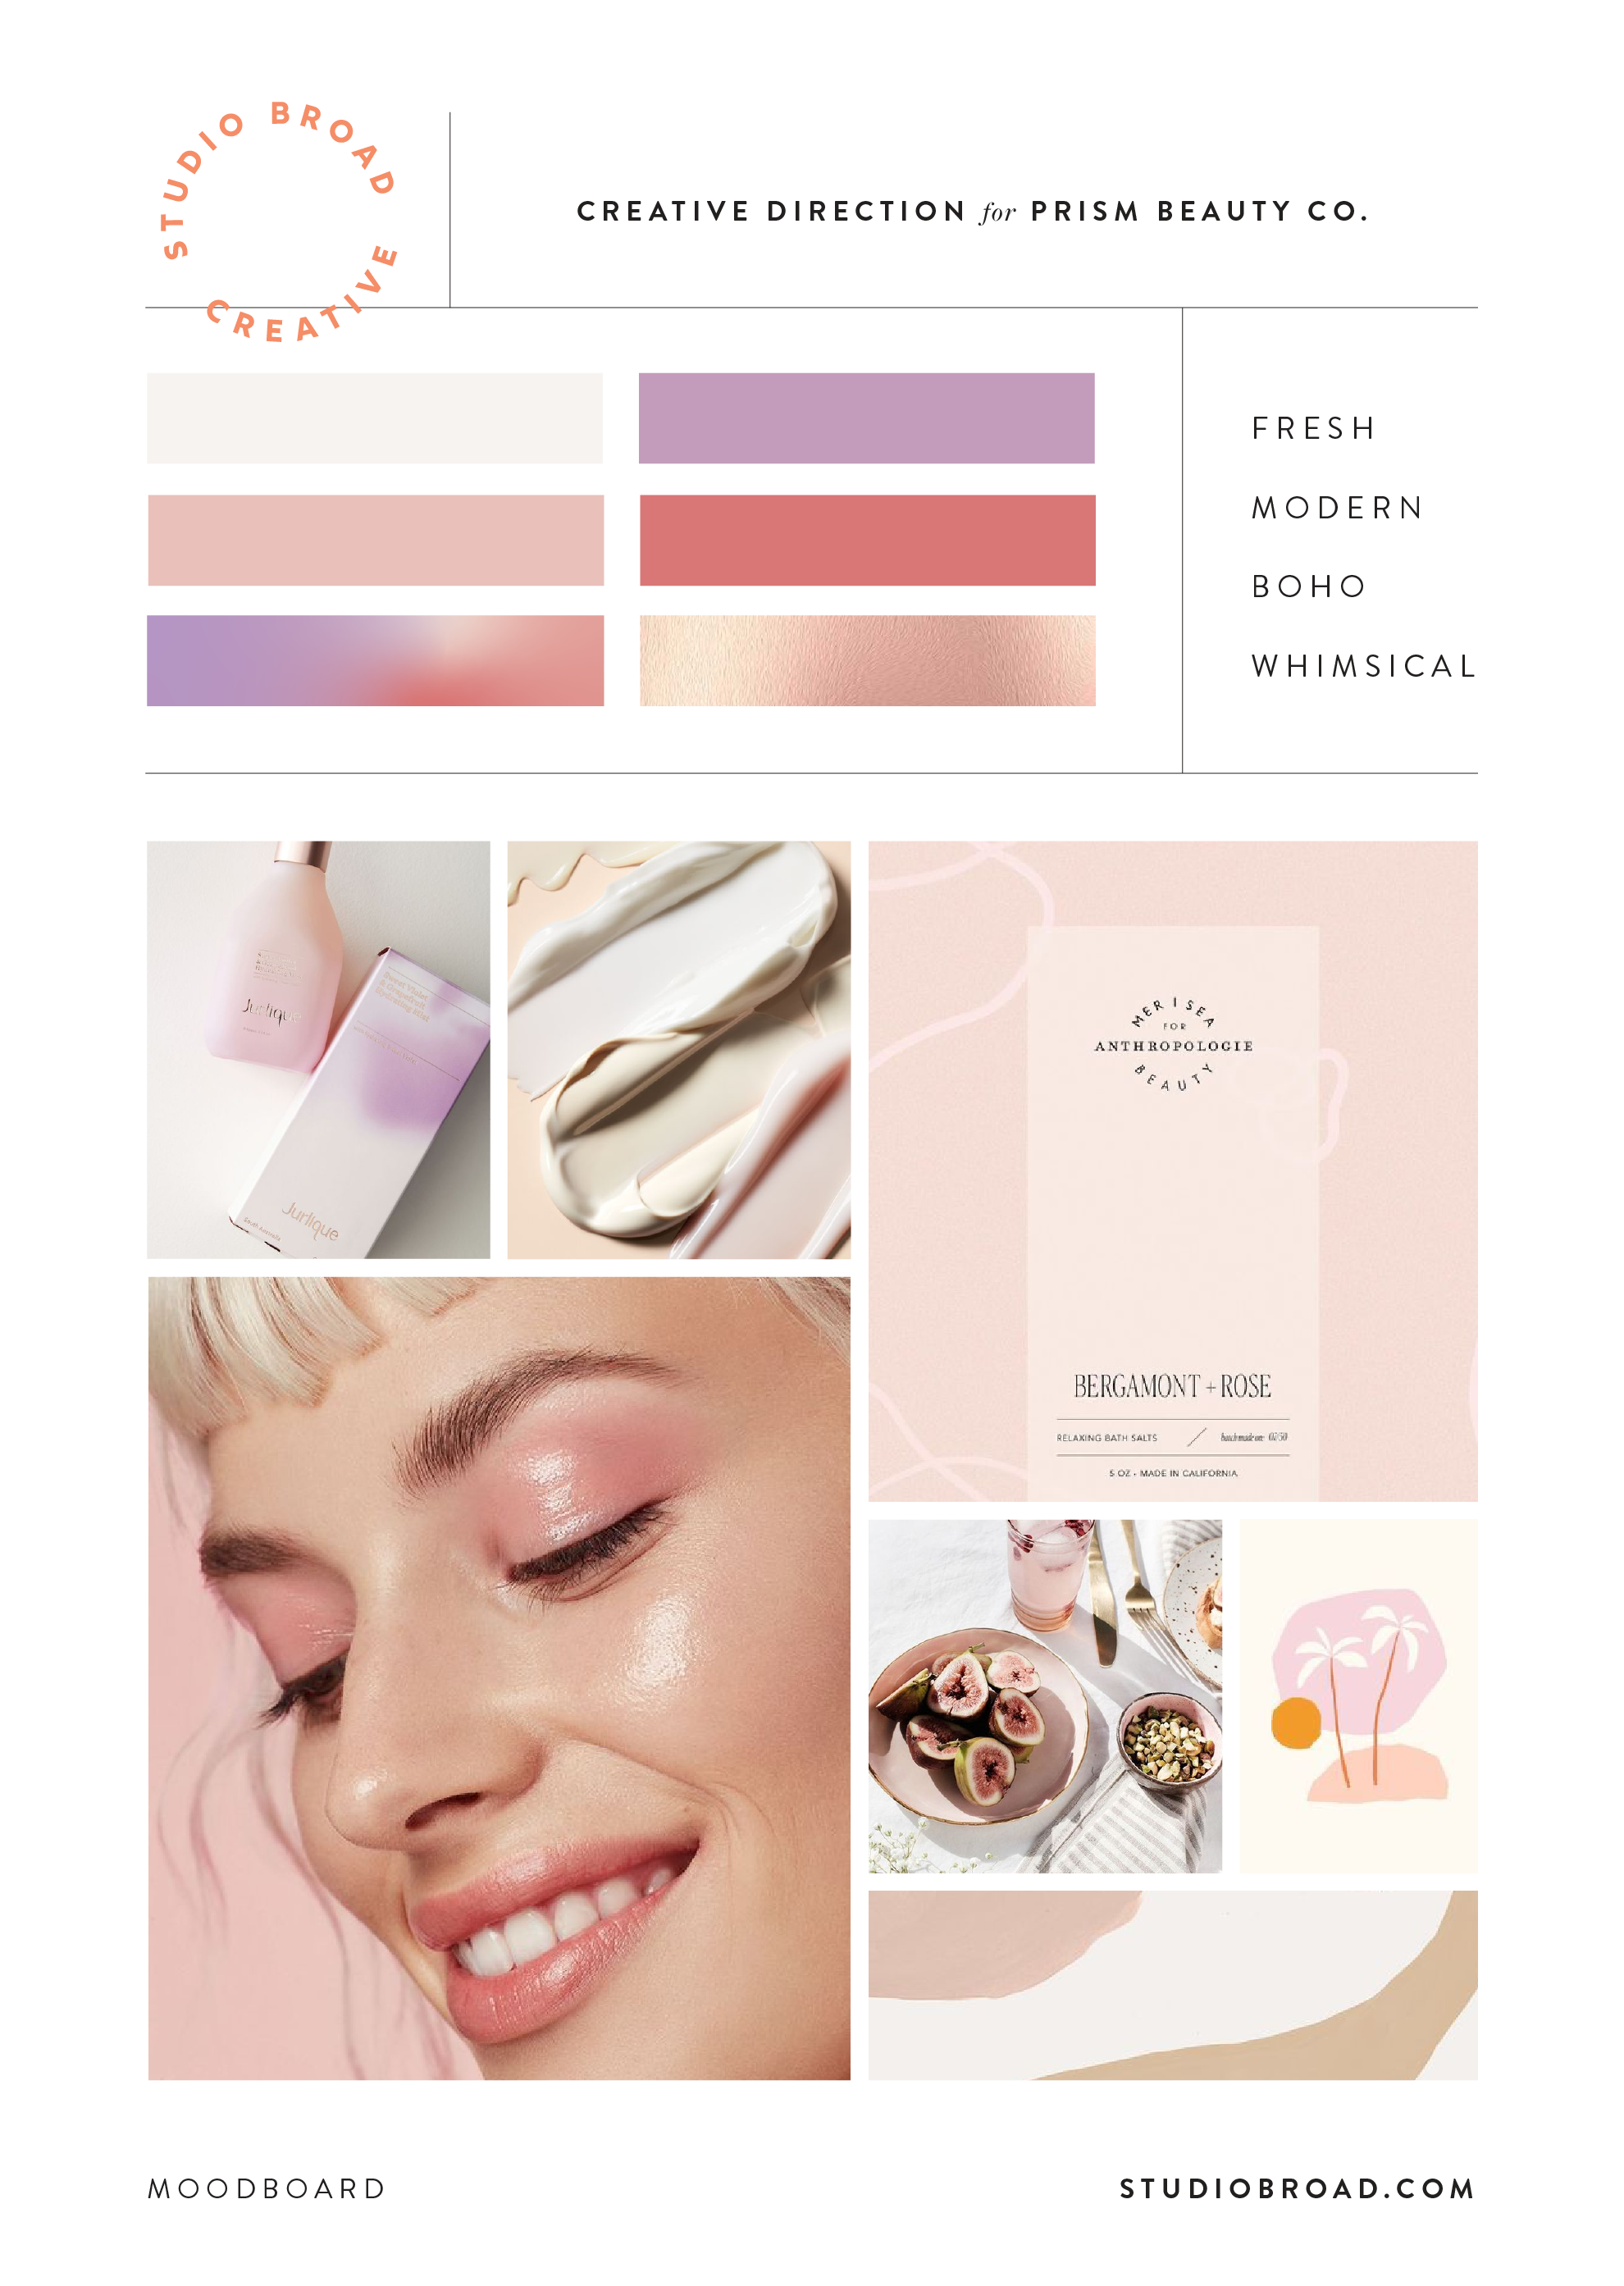 Creative direction and mood board for Prism Beauty Co. branding design